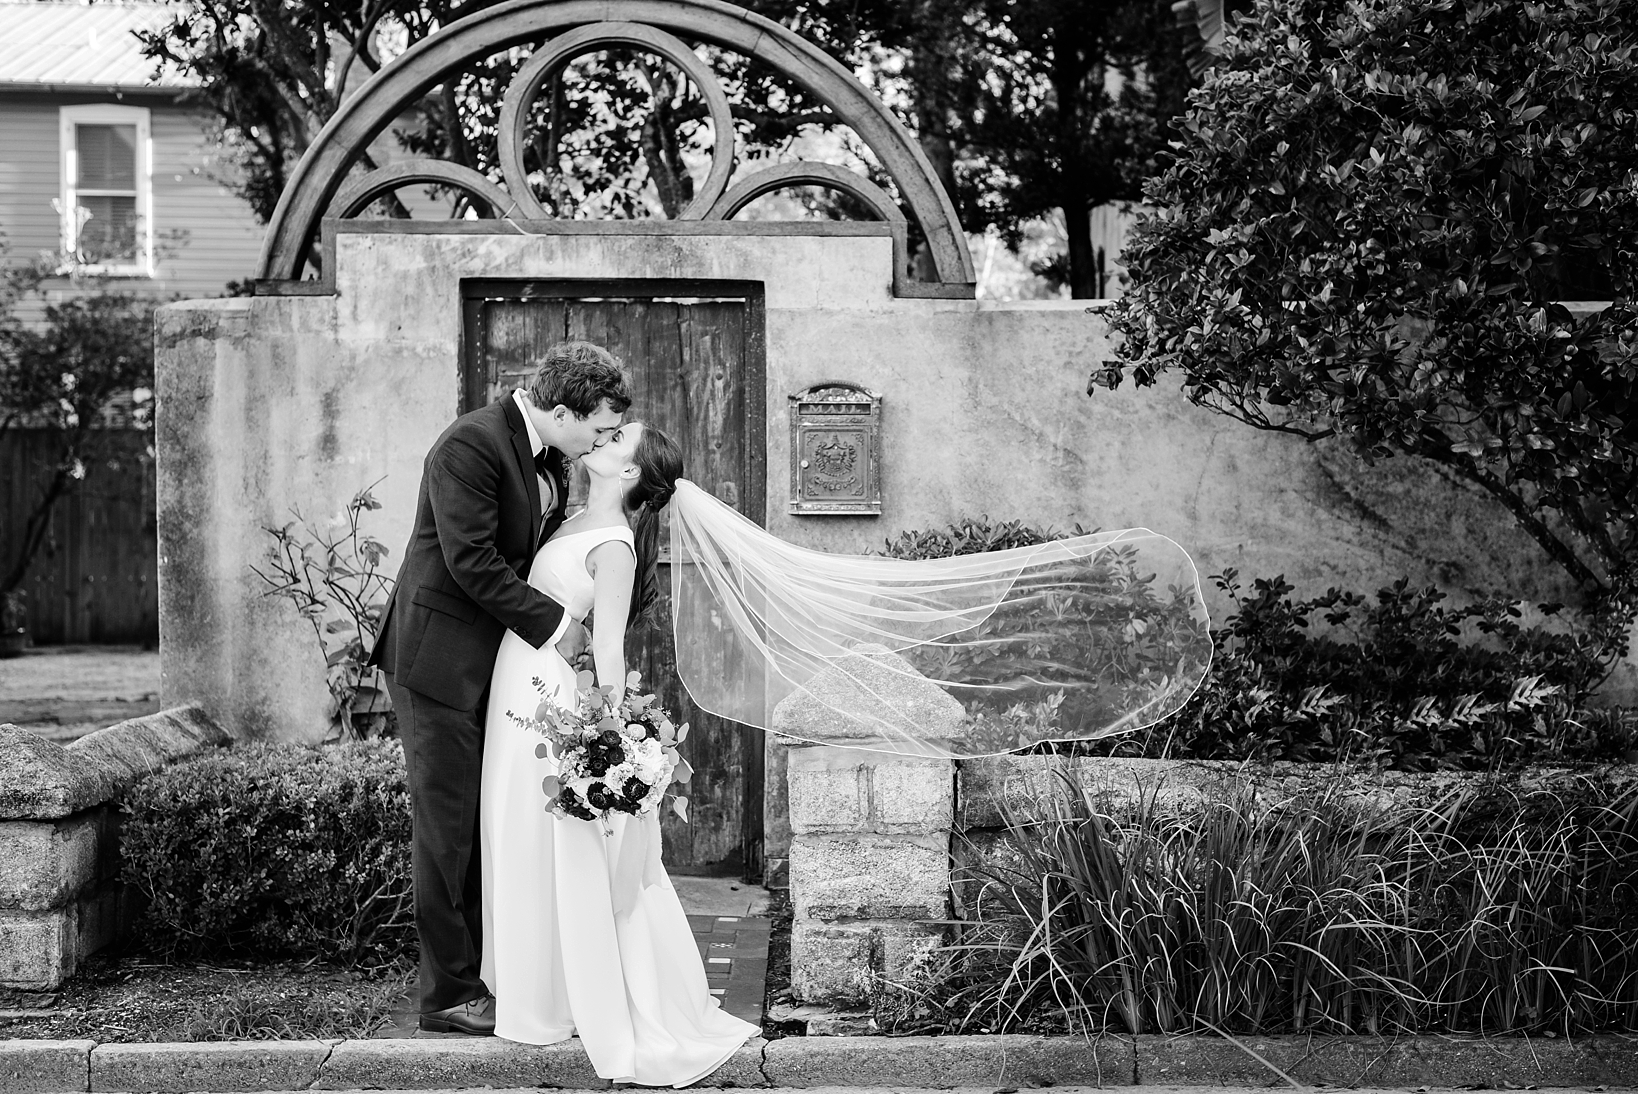 Black and white image of a bride and groom kissing while her veil blows in the wind